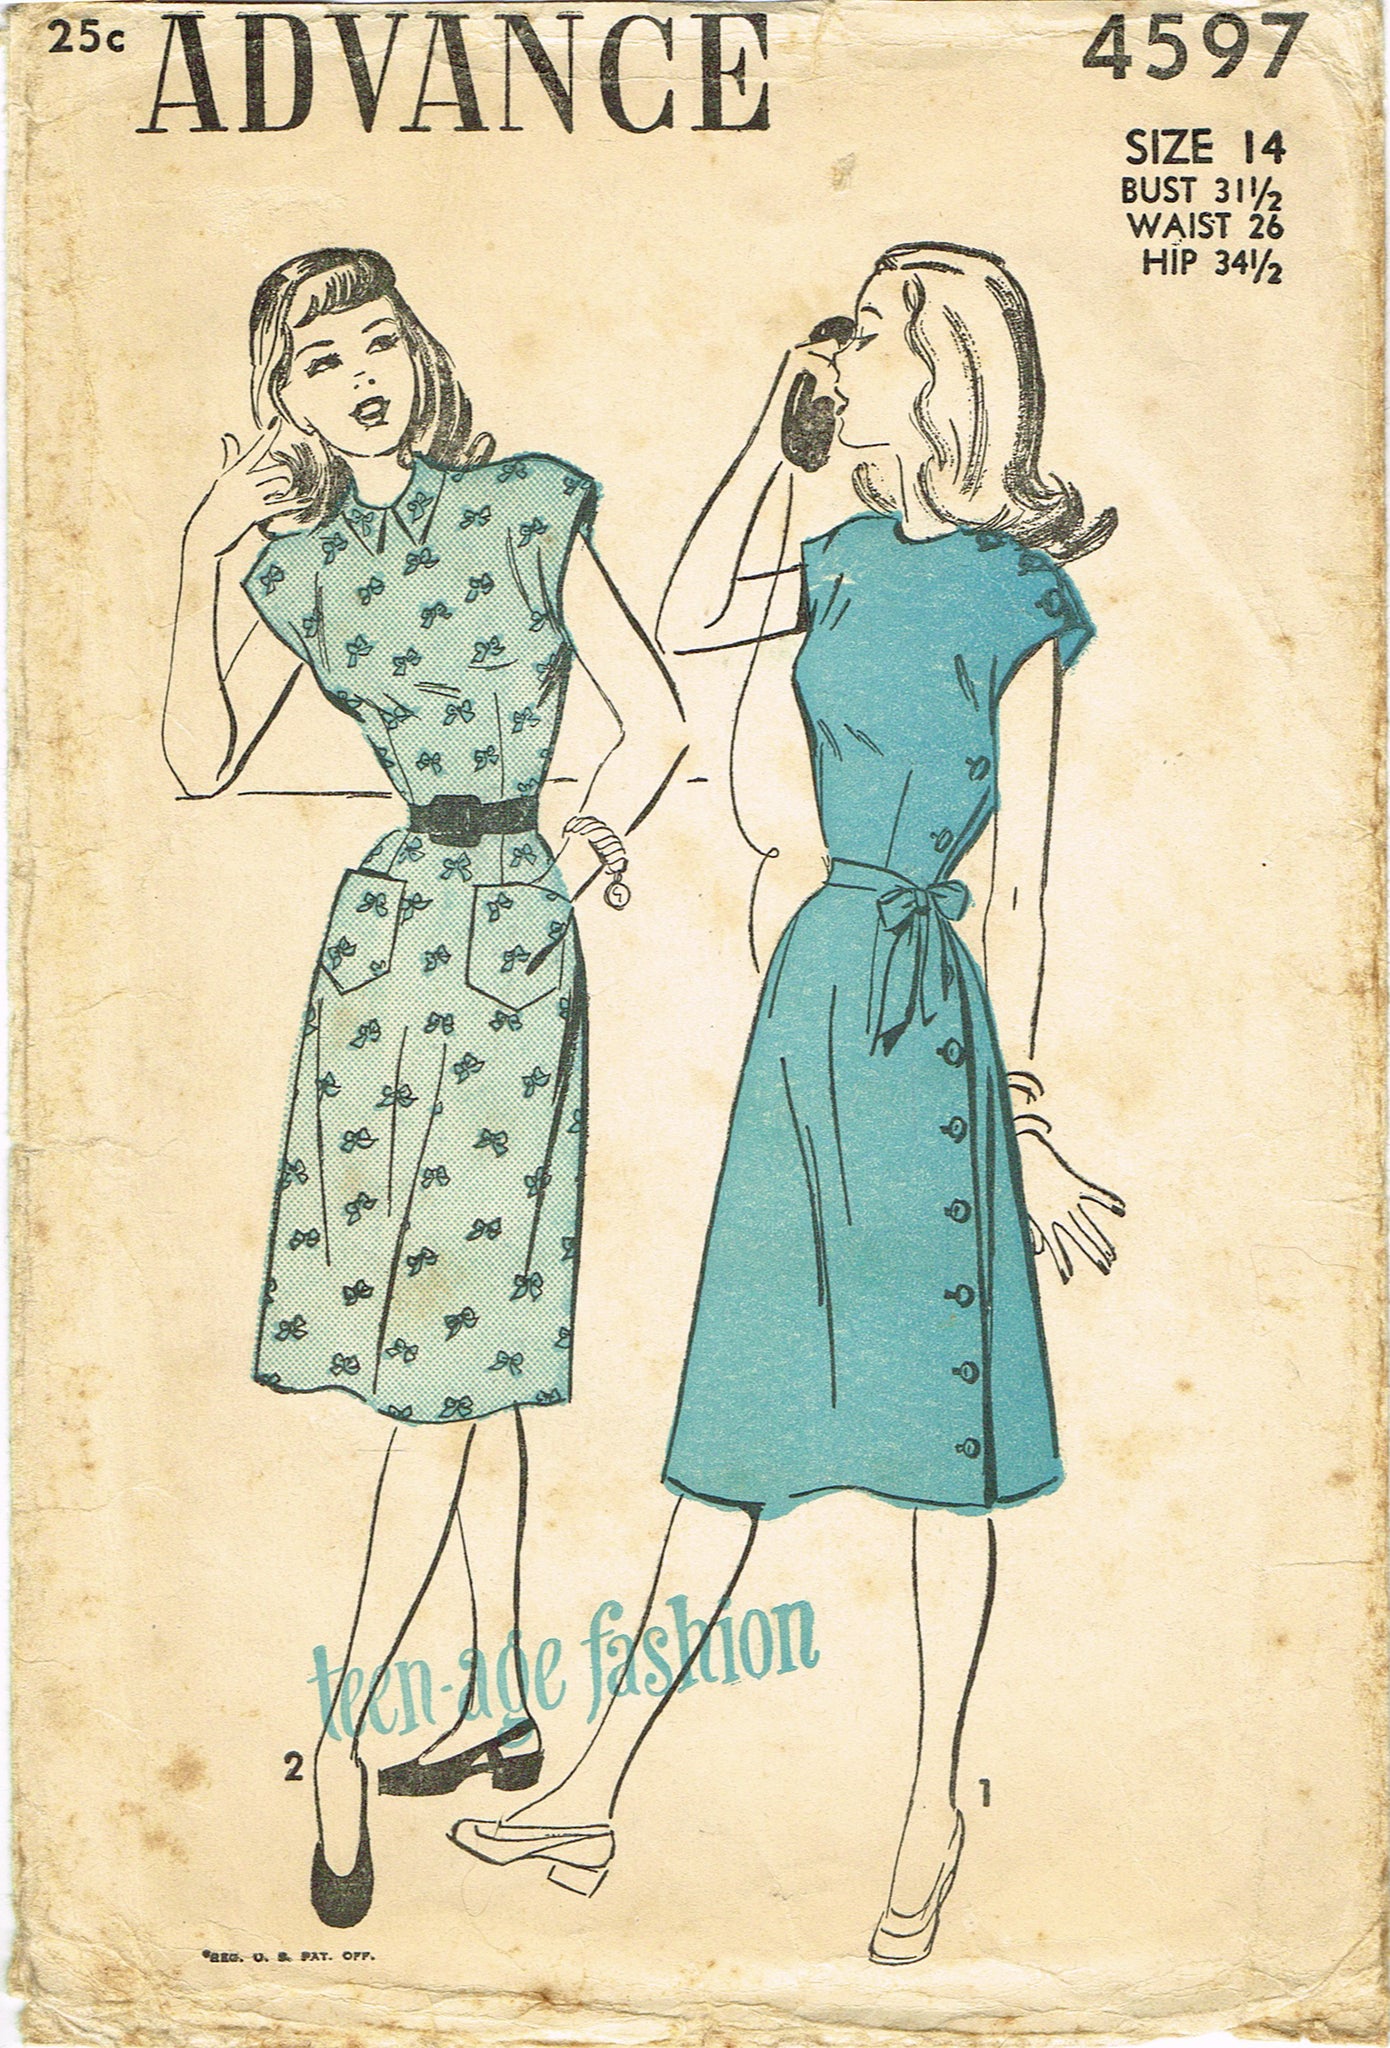 Vintage Sewing Dress Pattern 3867 The American Weekly 1940s Junior Miss  Size 15